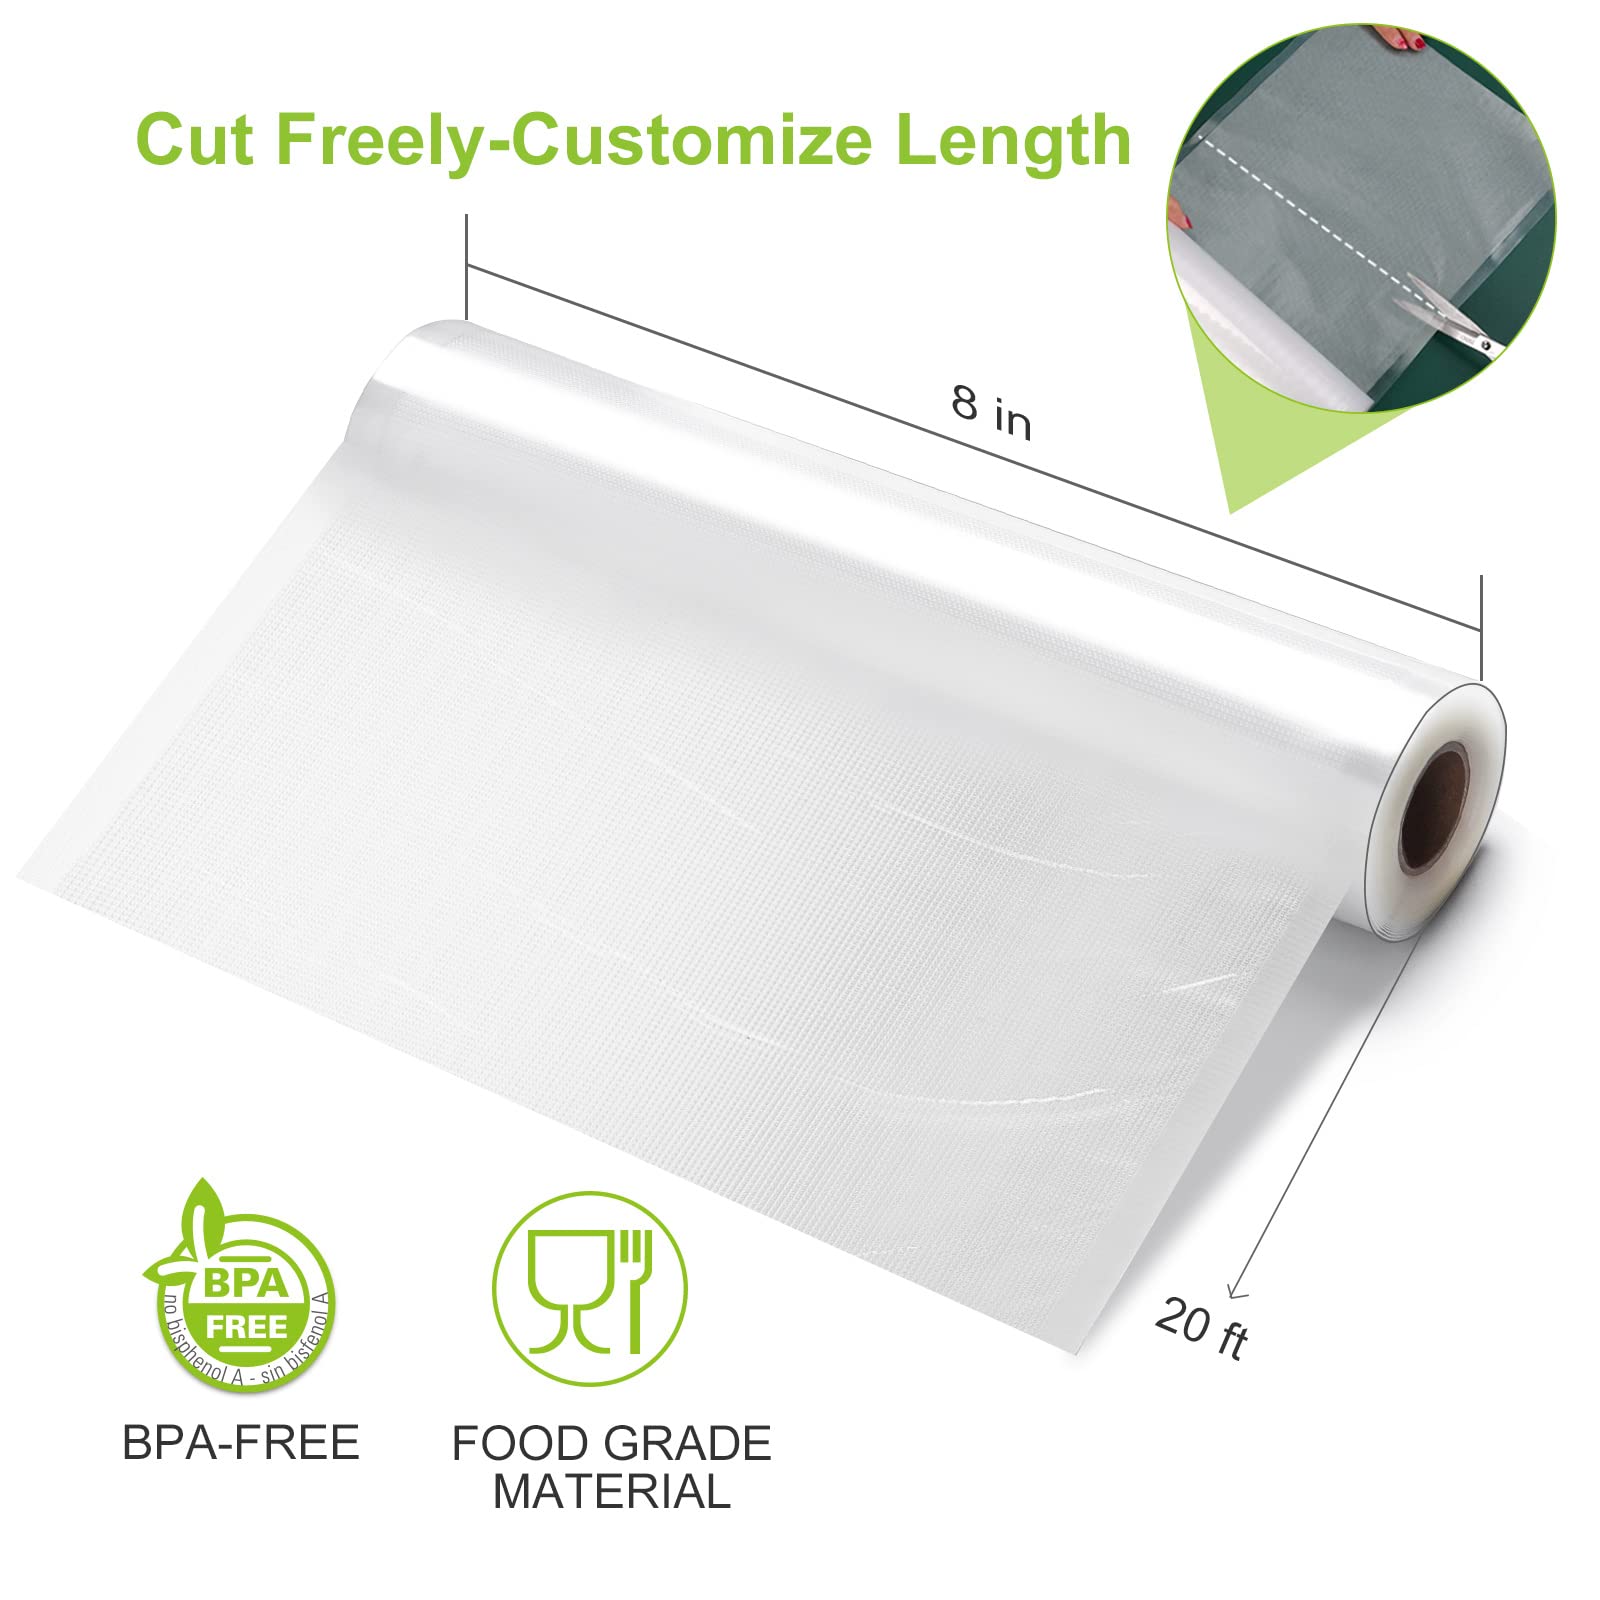 Bonsenkitchen Vacuum Food Sealer Rolls Bags, 2 Packs 8 in x 20 ft Storage Bags, BPA Free, Durable Commercial Customized Size Food Bags for Food Storage and Sous Vide Cooking